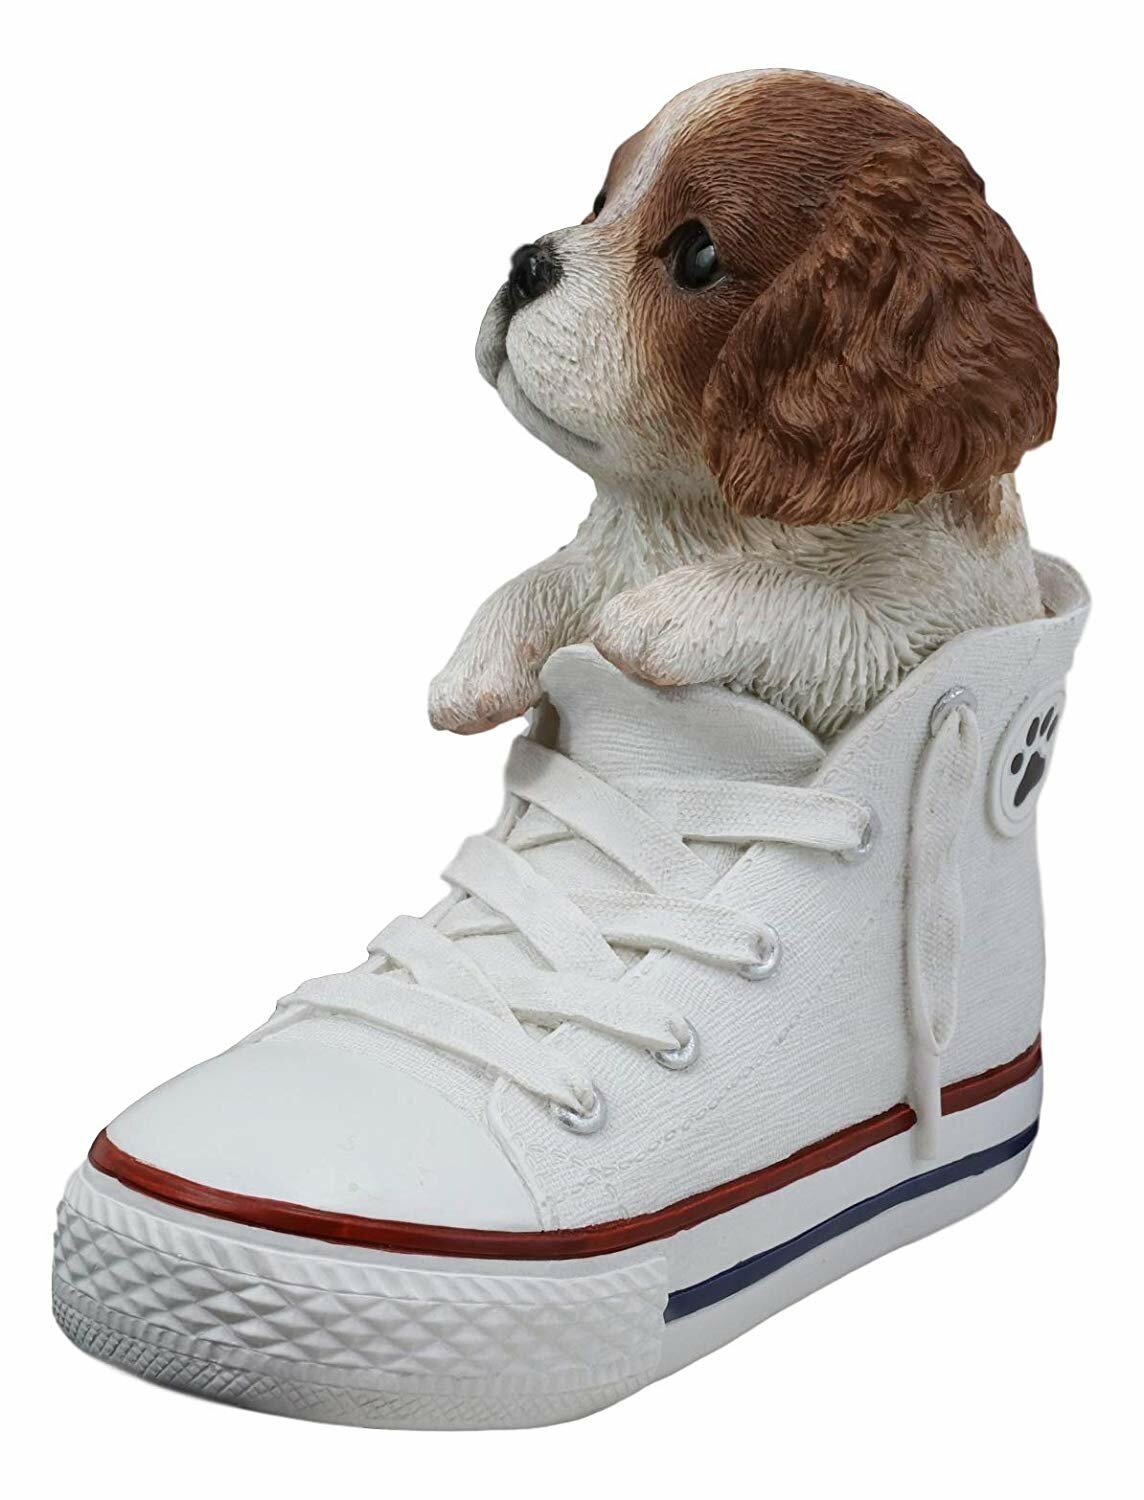 puppy sneakers